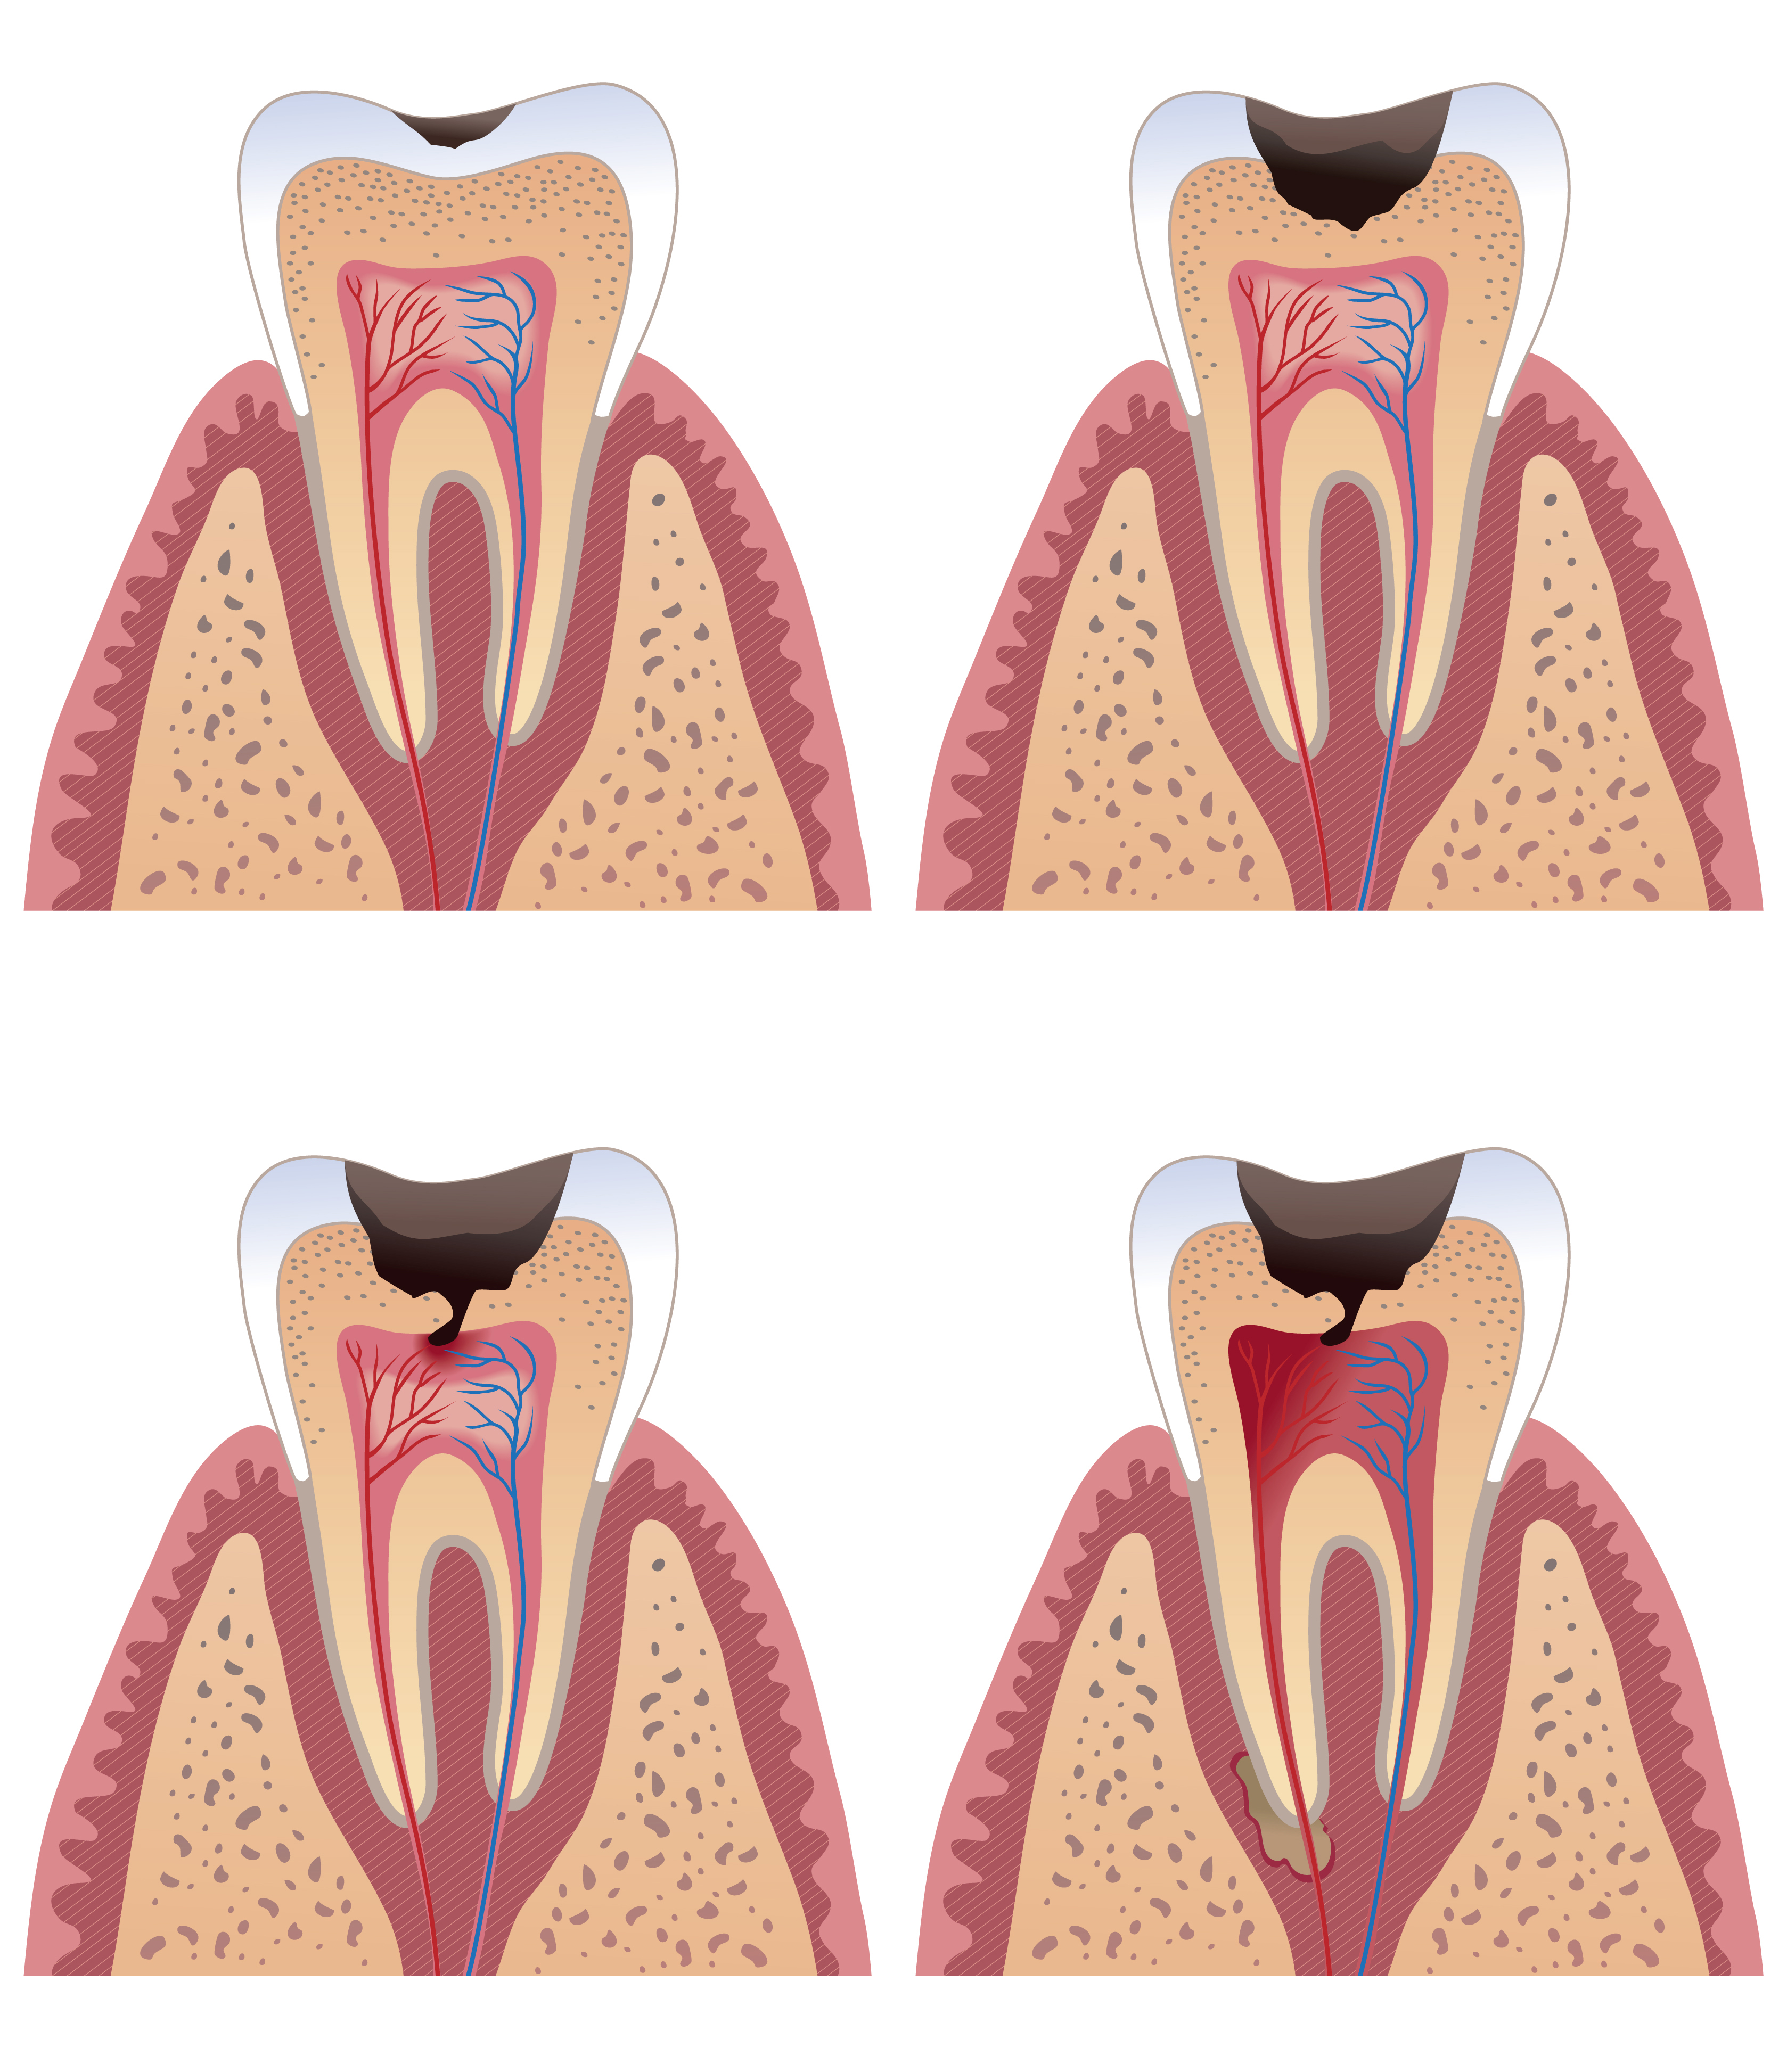 TREATMENT OF DEEP CARIES LESIONS